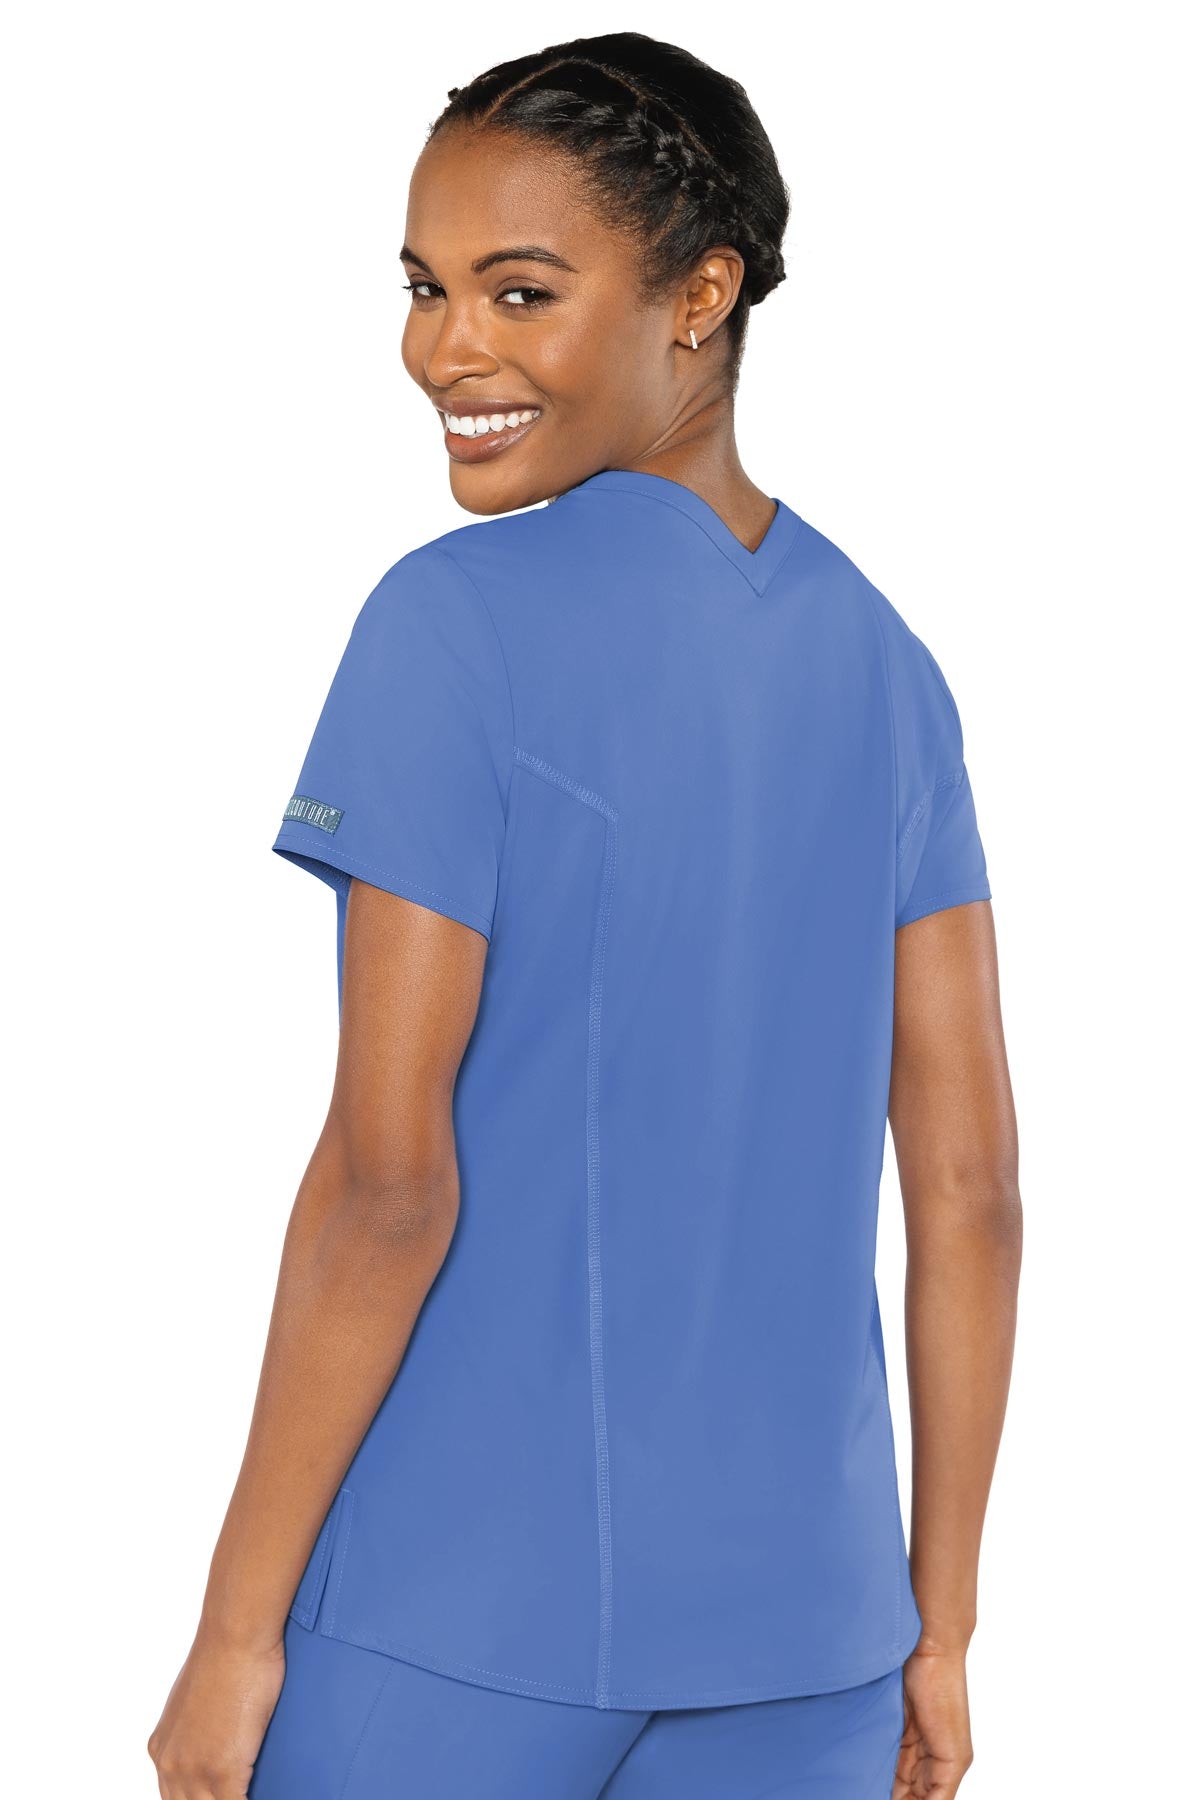 MED COUTURE Double V Neck Top